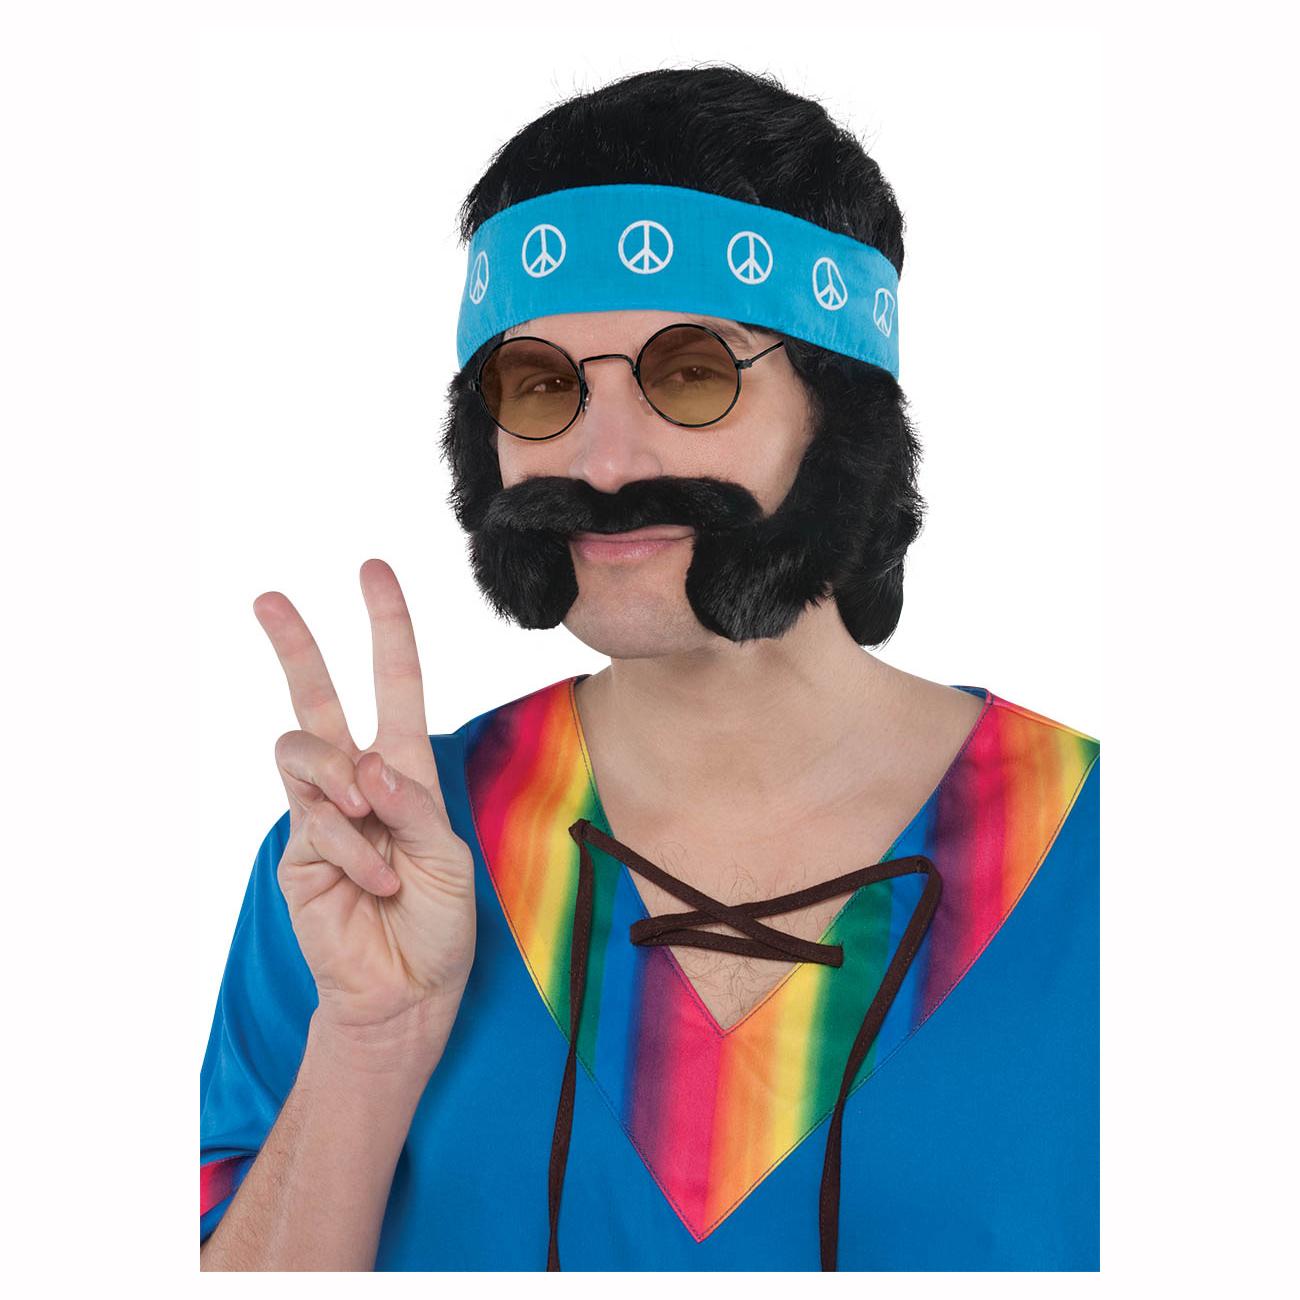 Hippie Costume Kit Costumes & Apparel - Party Centre